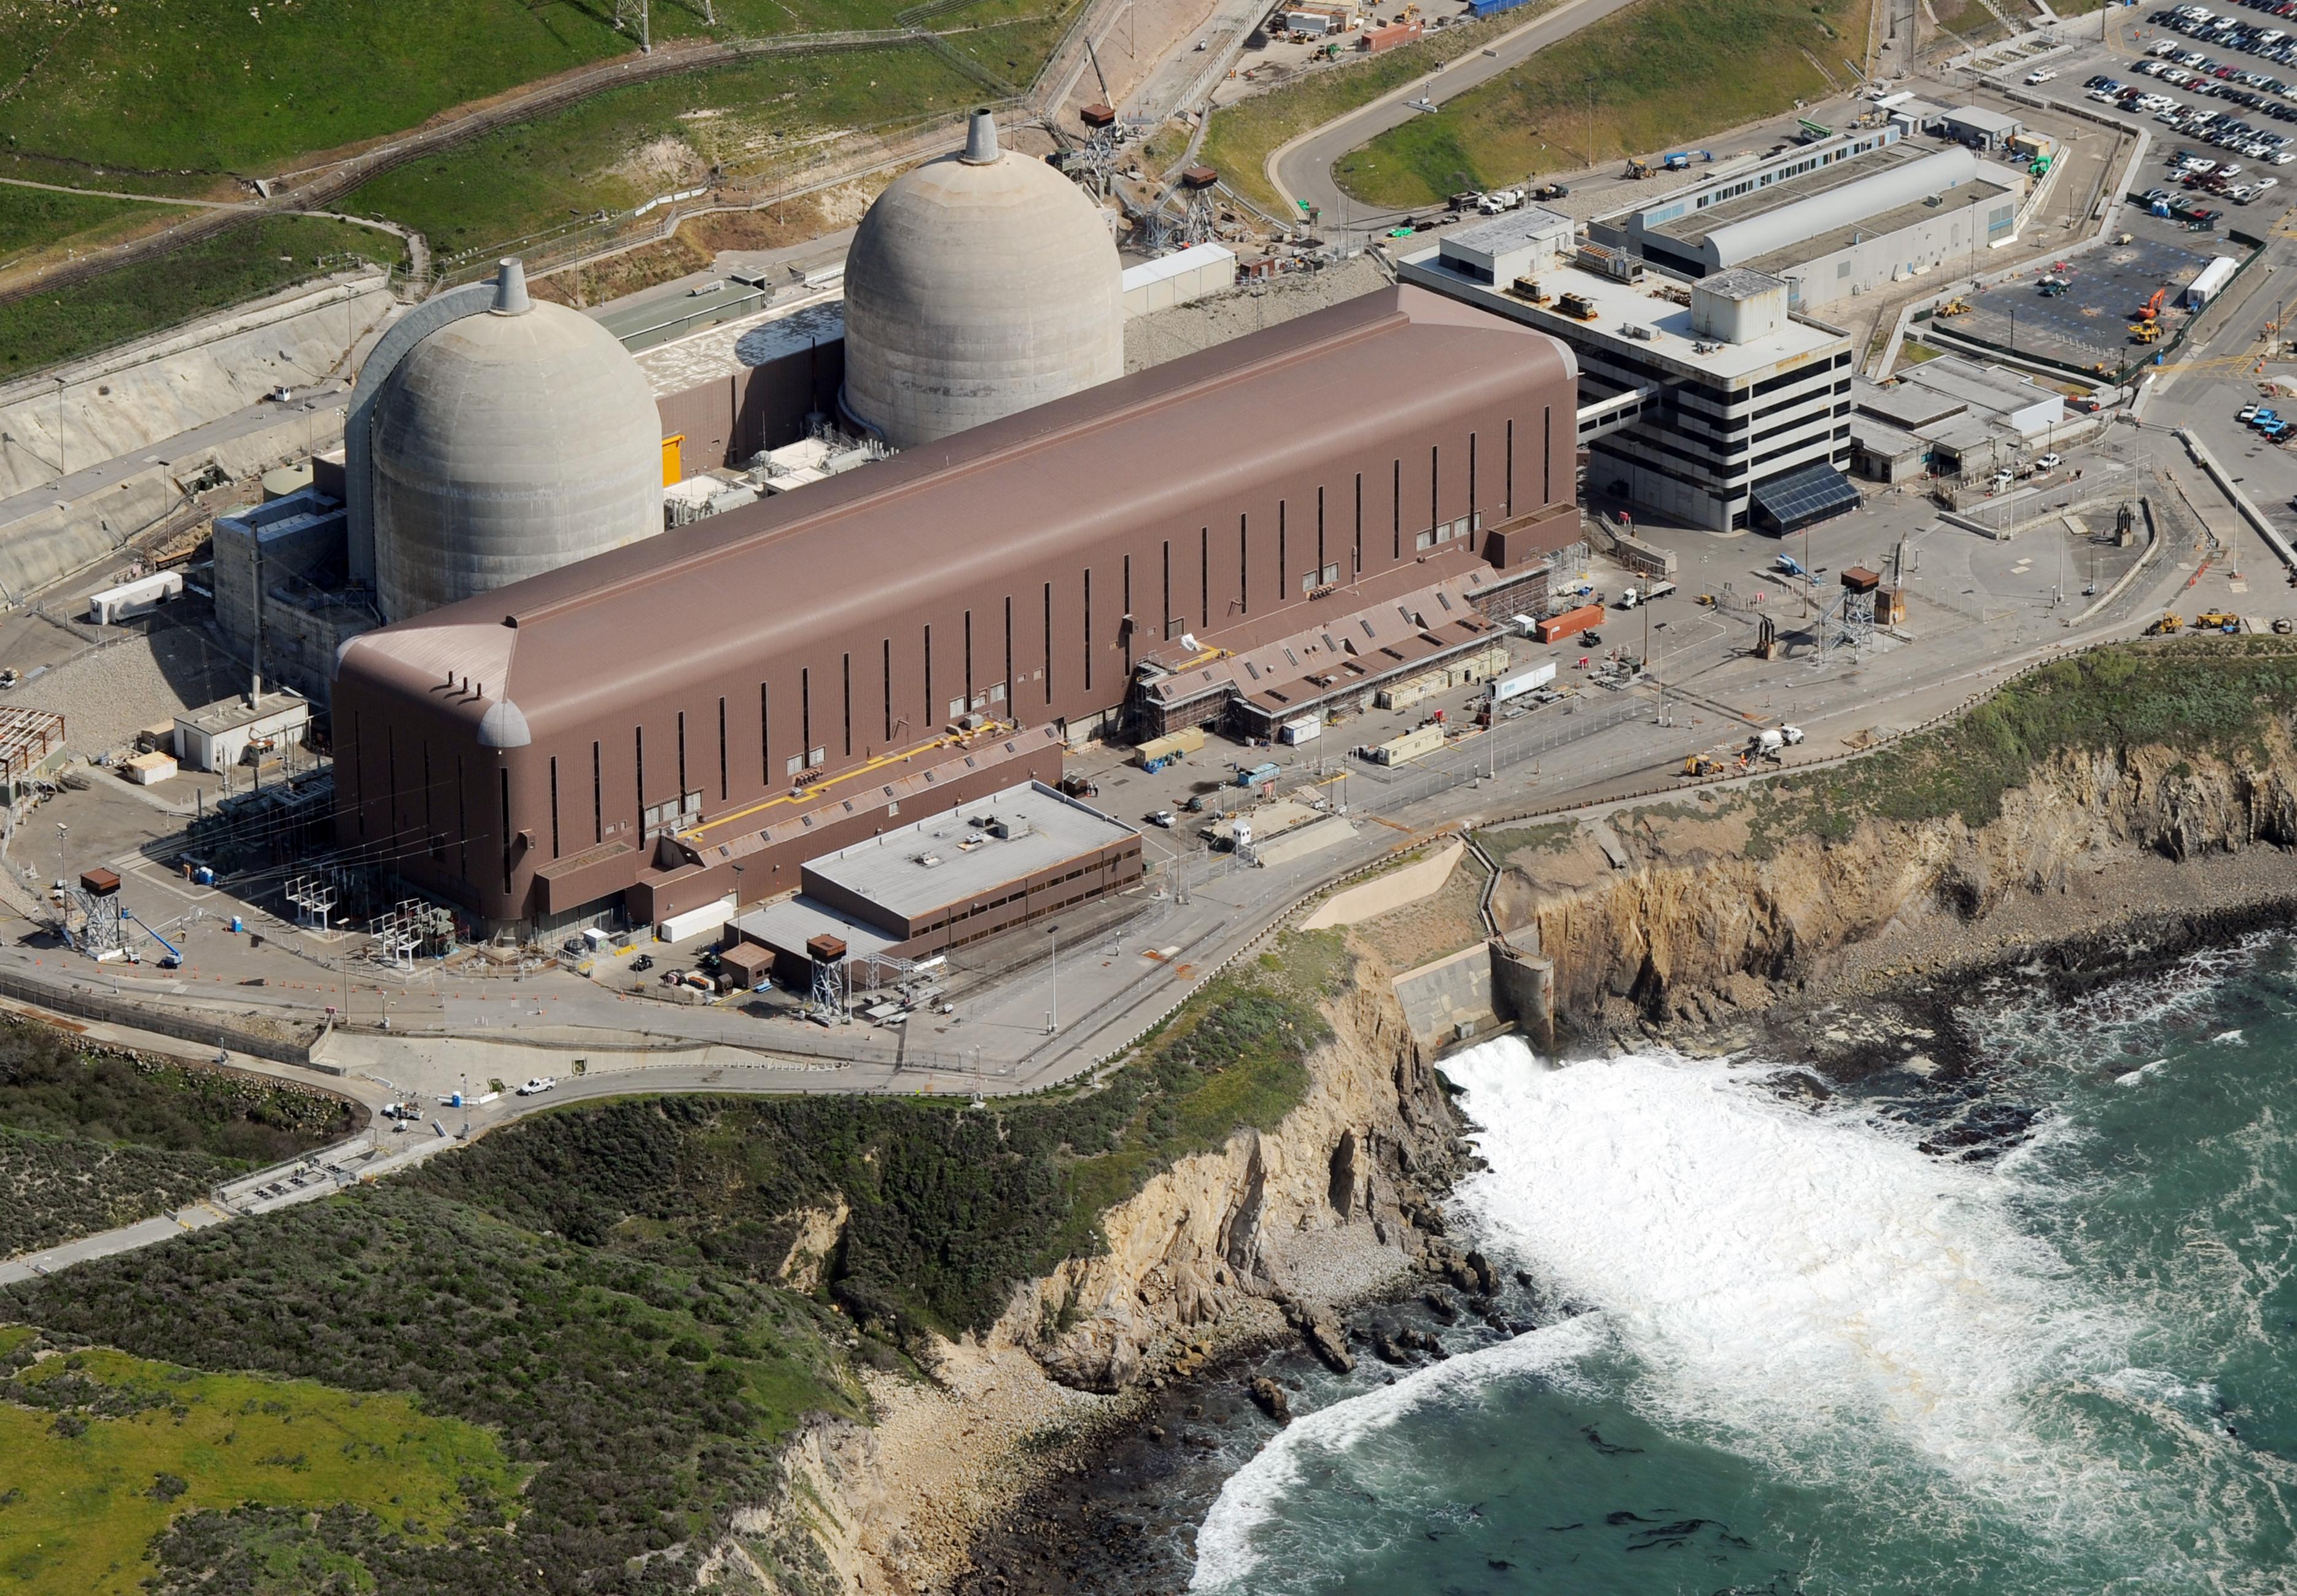 Loan for California’s Last Nuclear Power Plant Survives Budget Negotiations